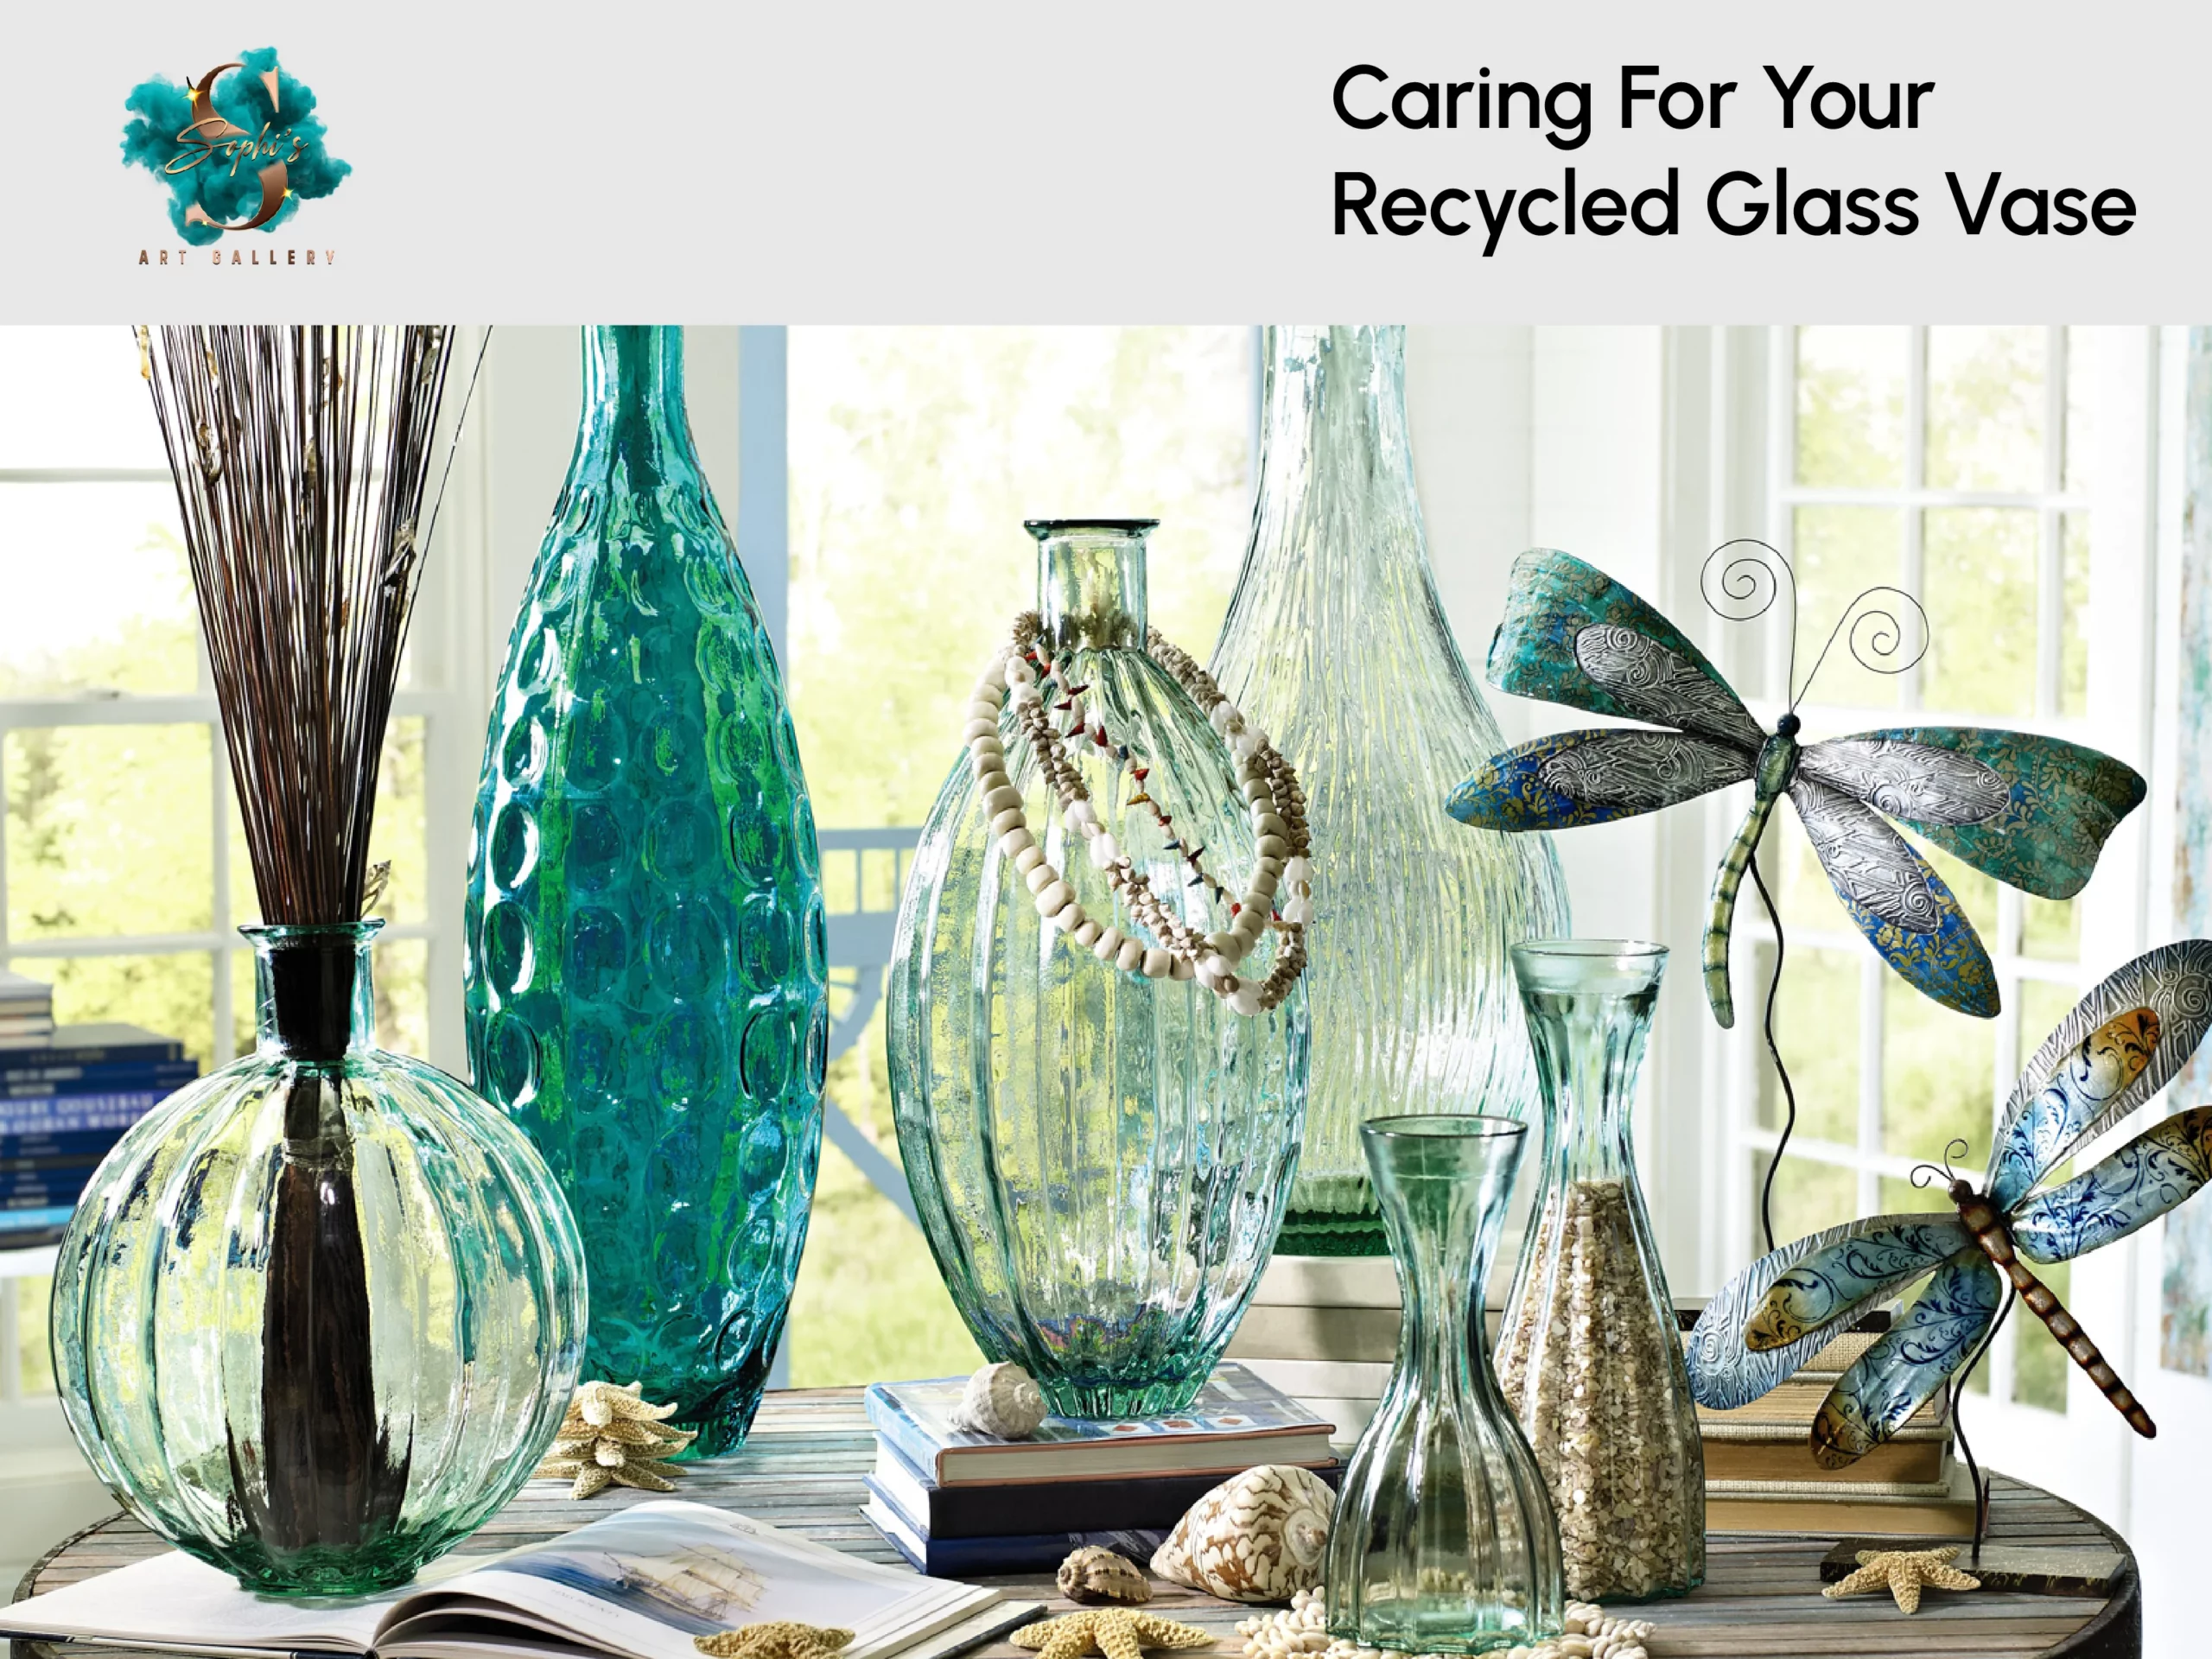 Caring For Your Recycled Glass Vase